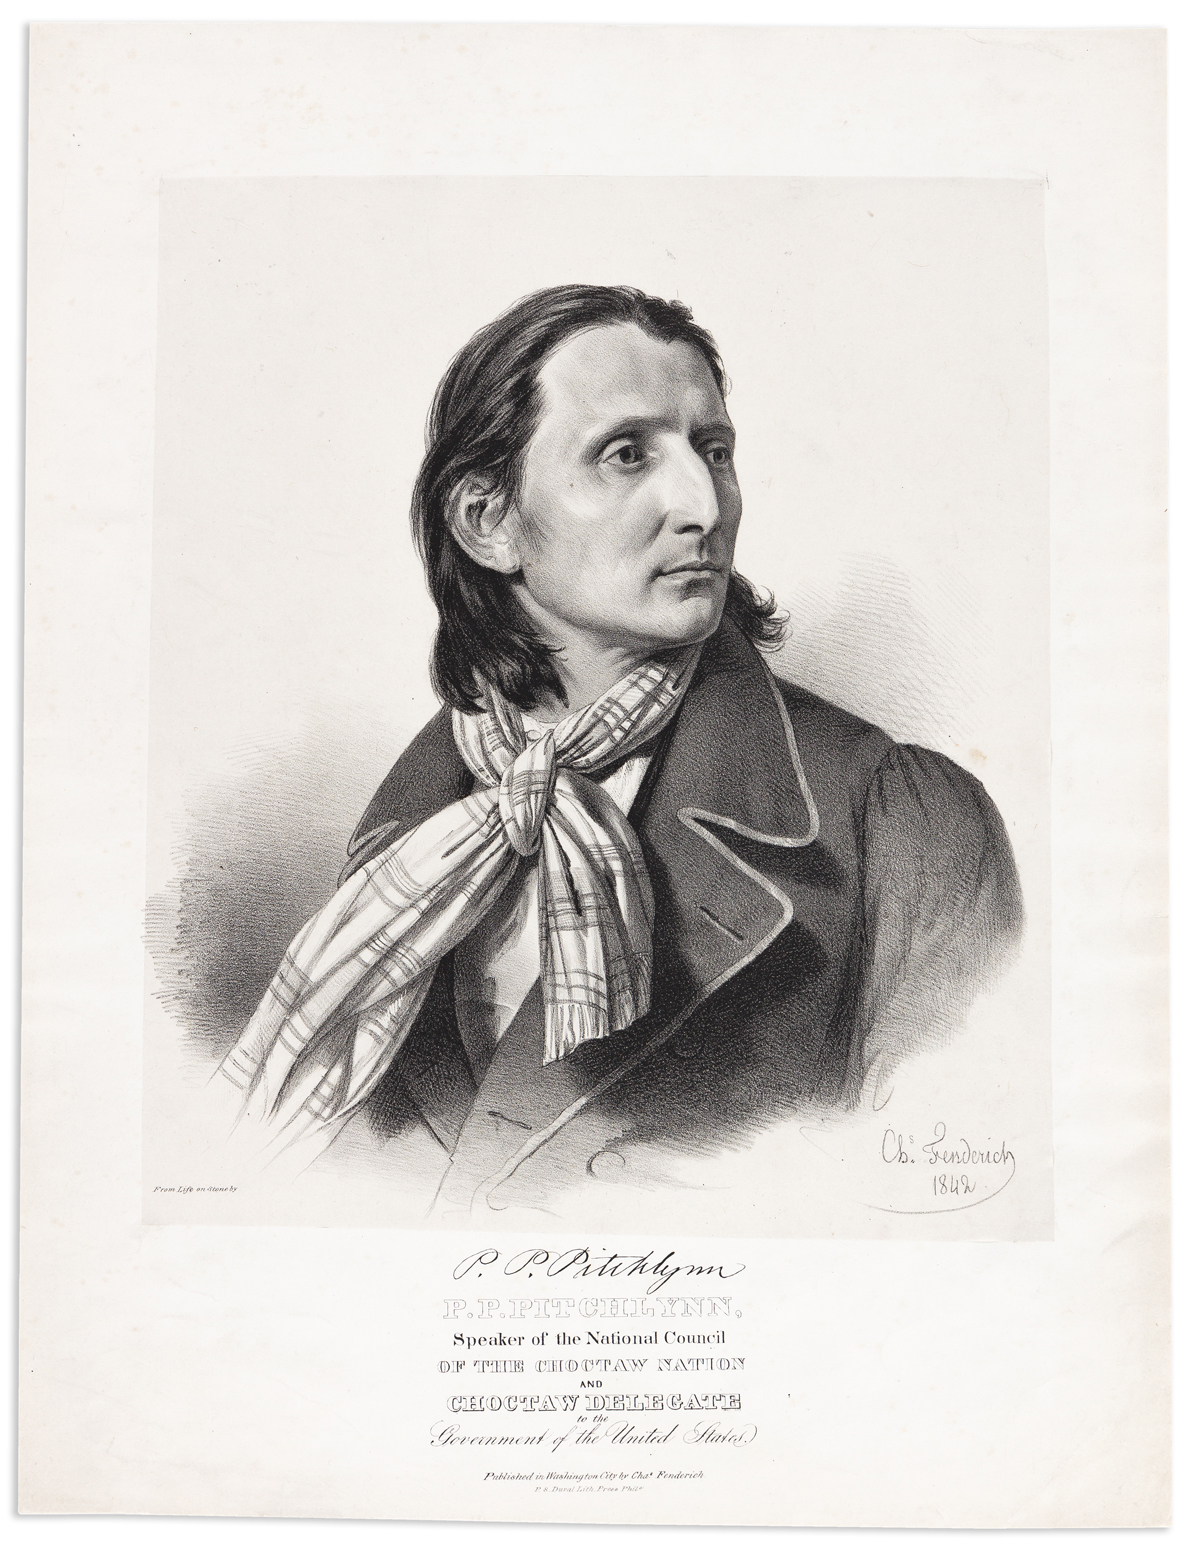 (AMERICAN INDIANS.) Charles Fenderich, artist and lithographer. P.P. Pitchlynn, Speaker of the National Council of the Choctaw Nation.